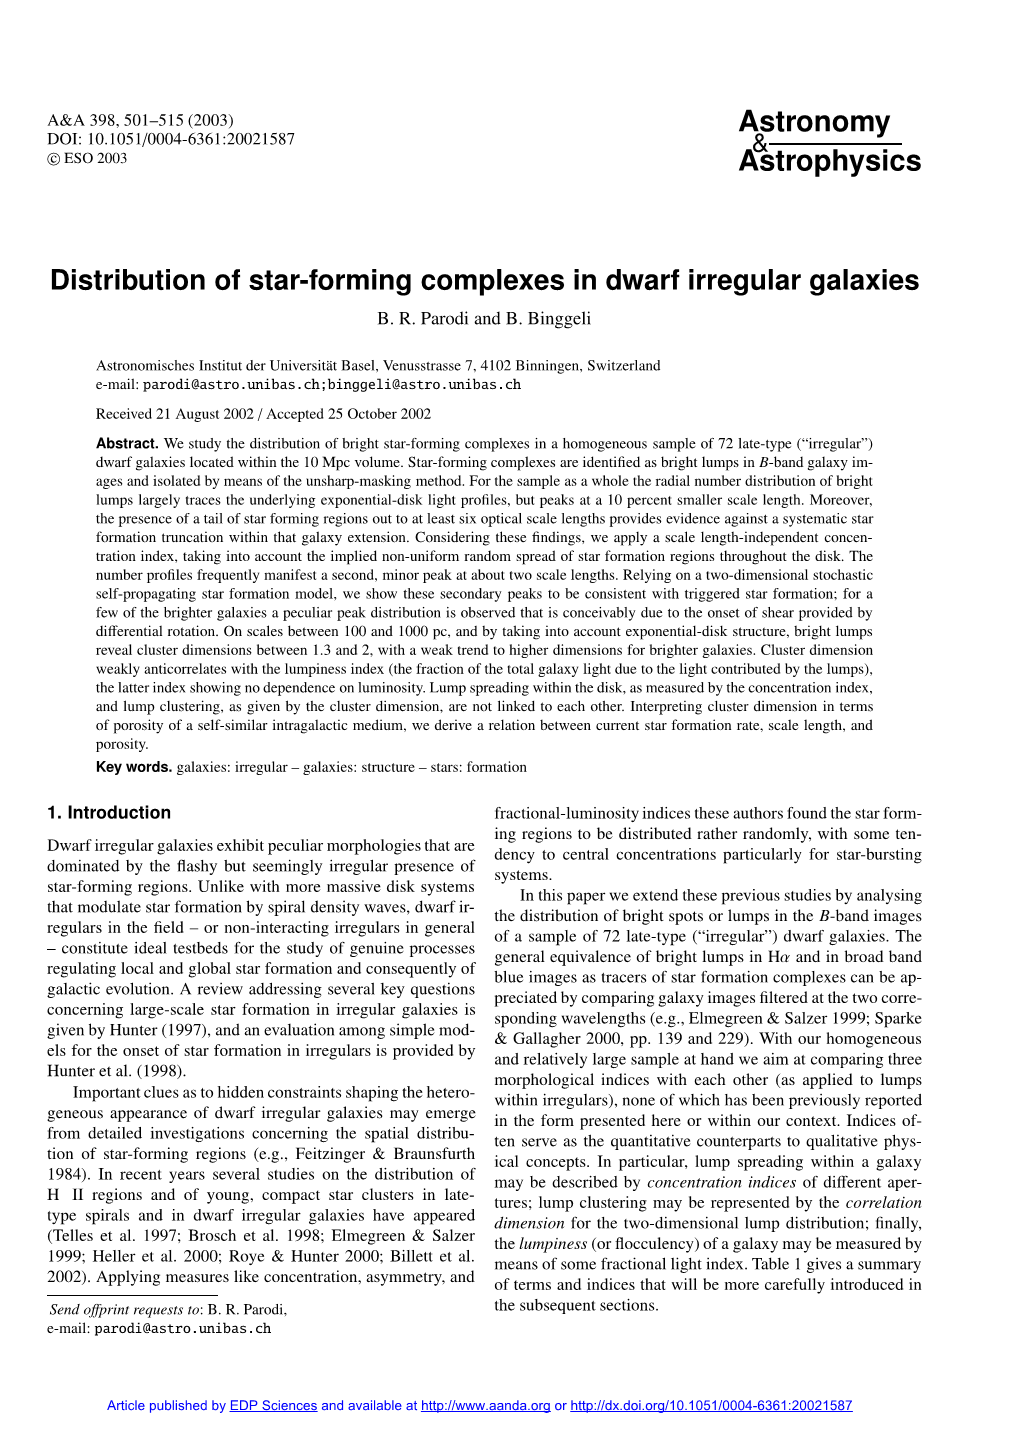 Distribution of Star-Forming Complexes in Dwarf Irregular Galaxies B